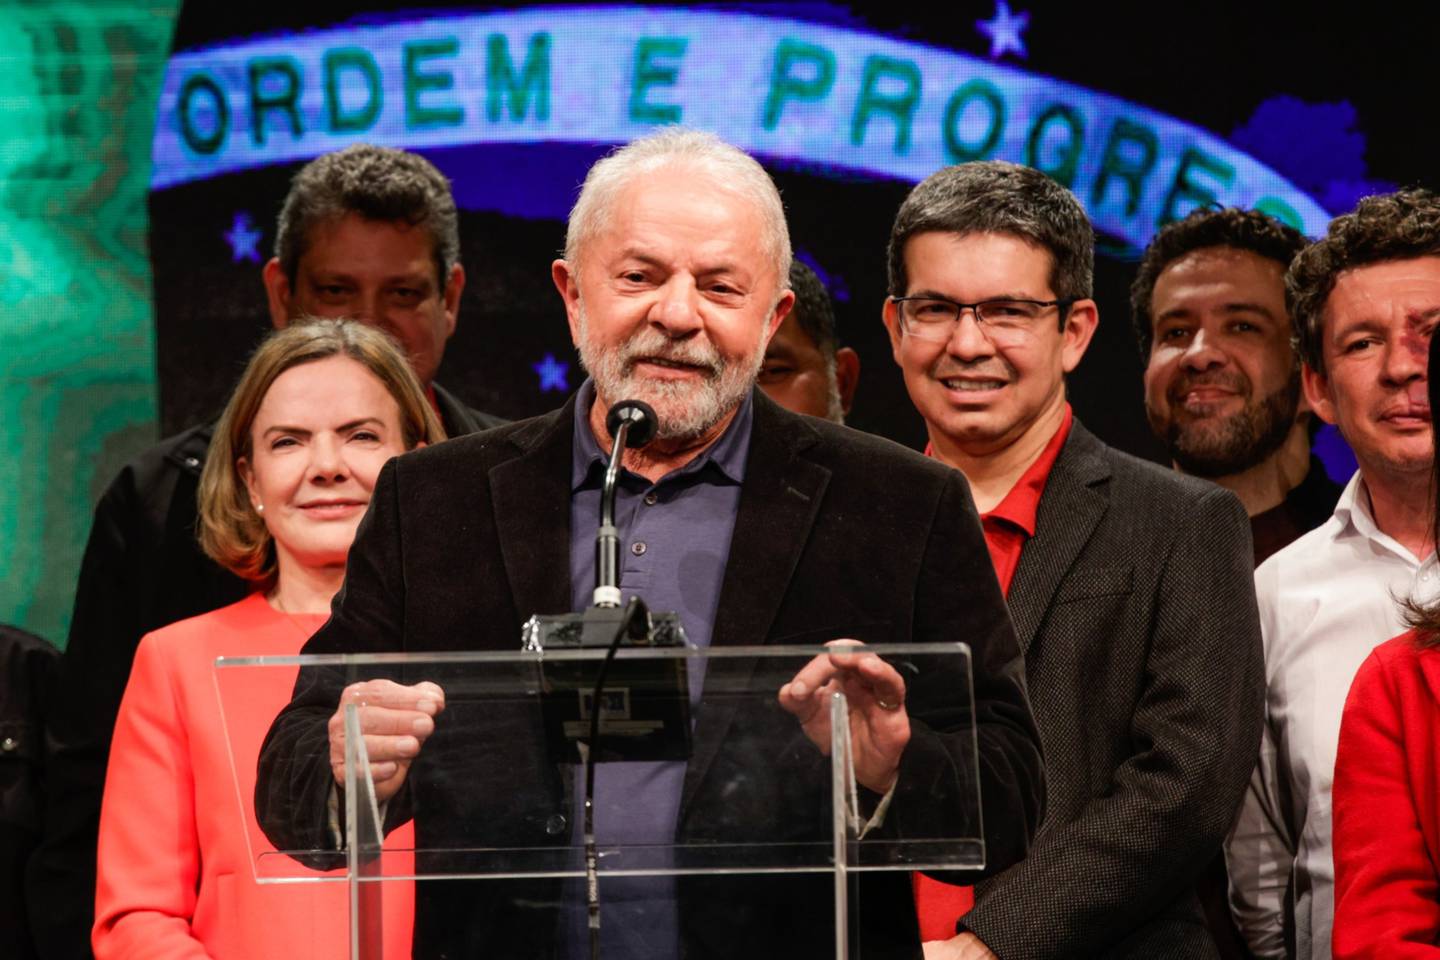 Former president Lula makes a speech following Sunday's election results